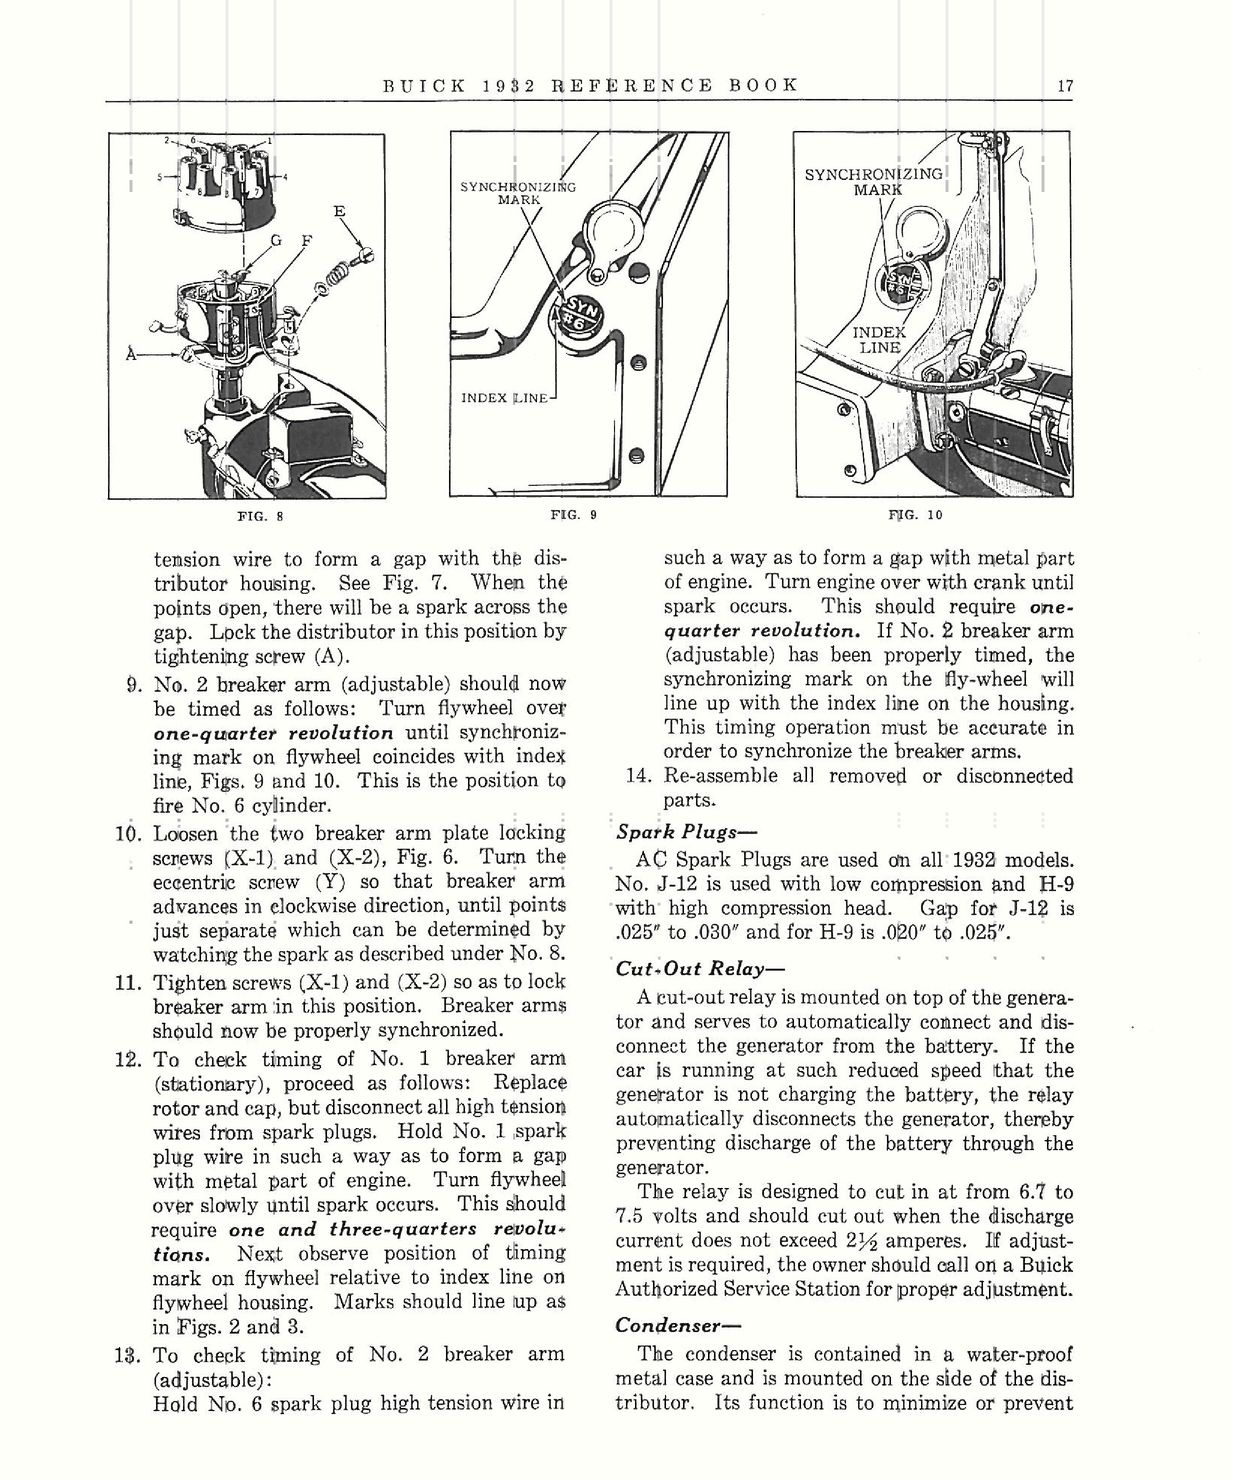 n_1932 Buick Reference Book-17.jpg